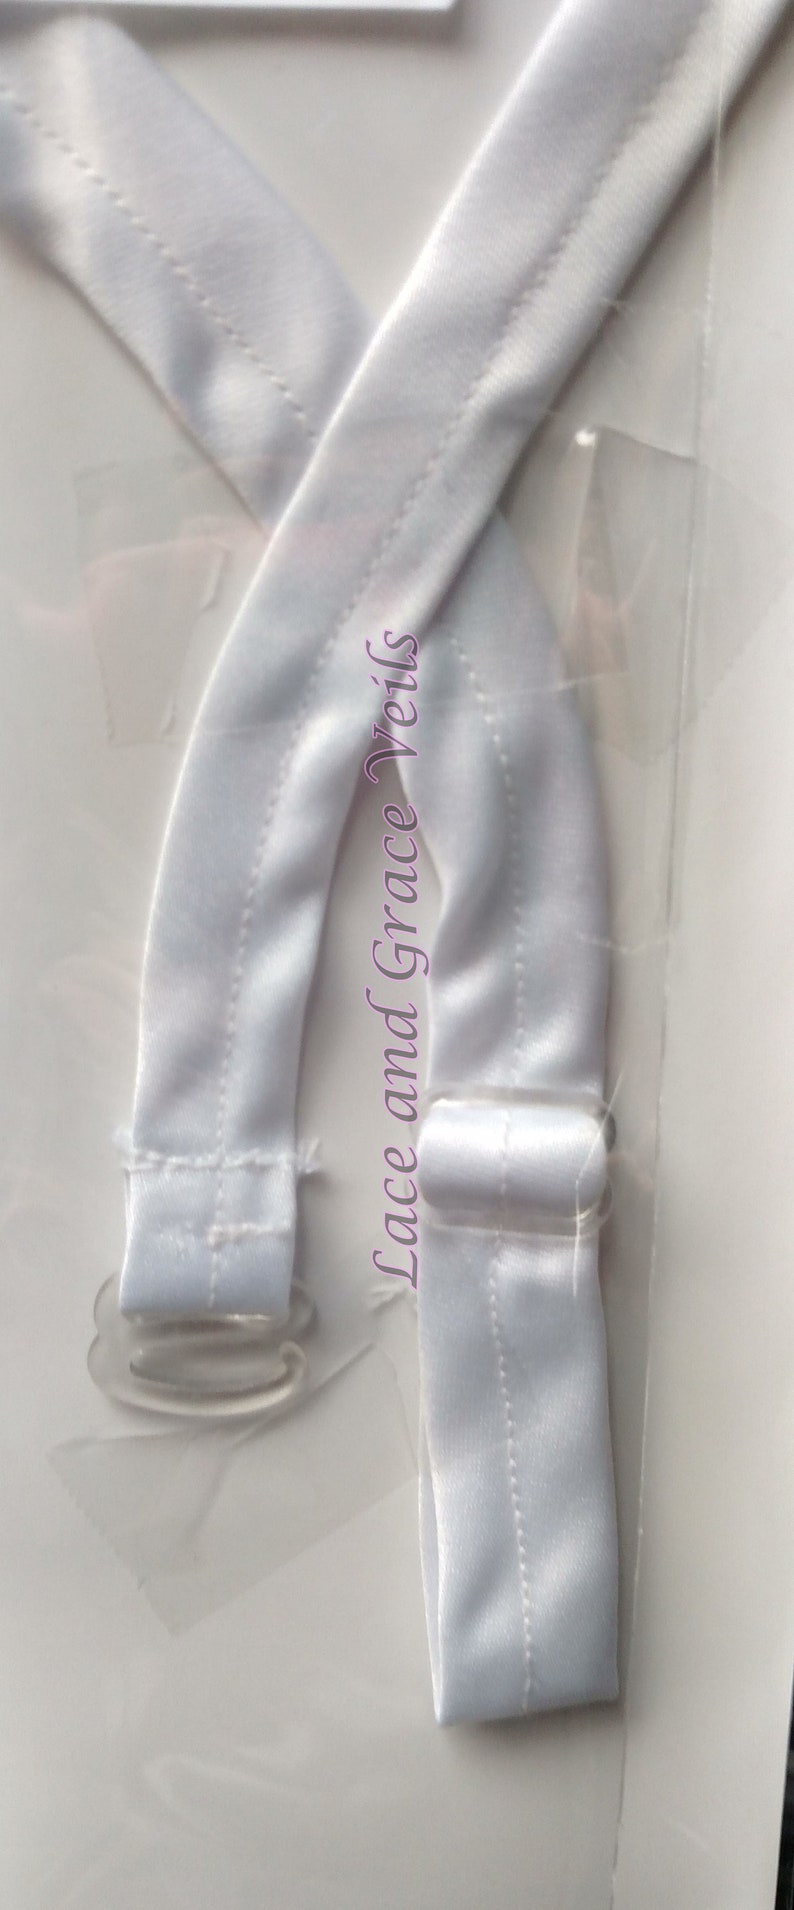 White First Communion Tie with Cross or Chalice, Navy Blue First Communion Tie with Cross or Chalice image 2